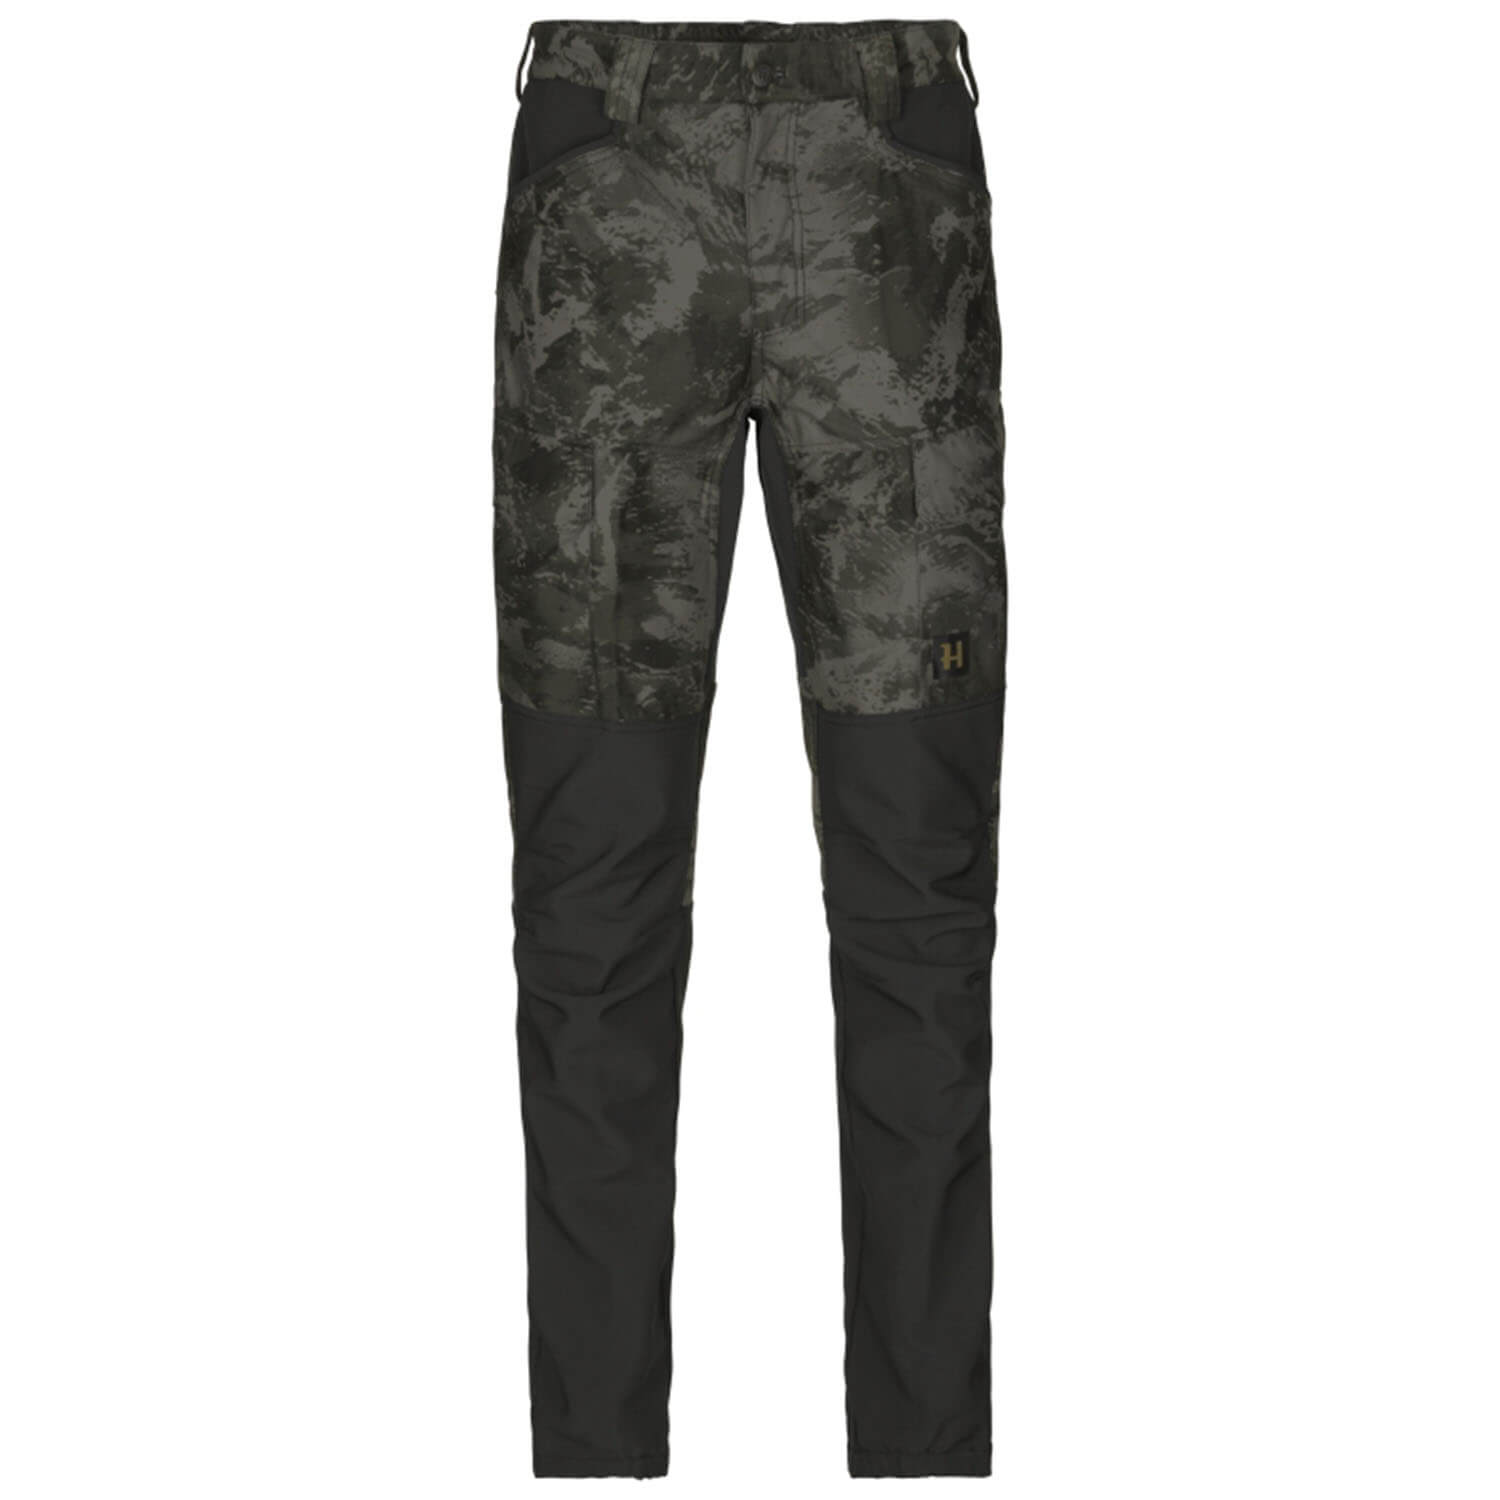 Härkila hunting trousers Noctyx Camo Silent - Shop by Activity